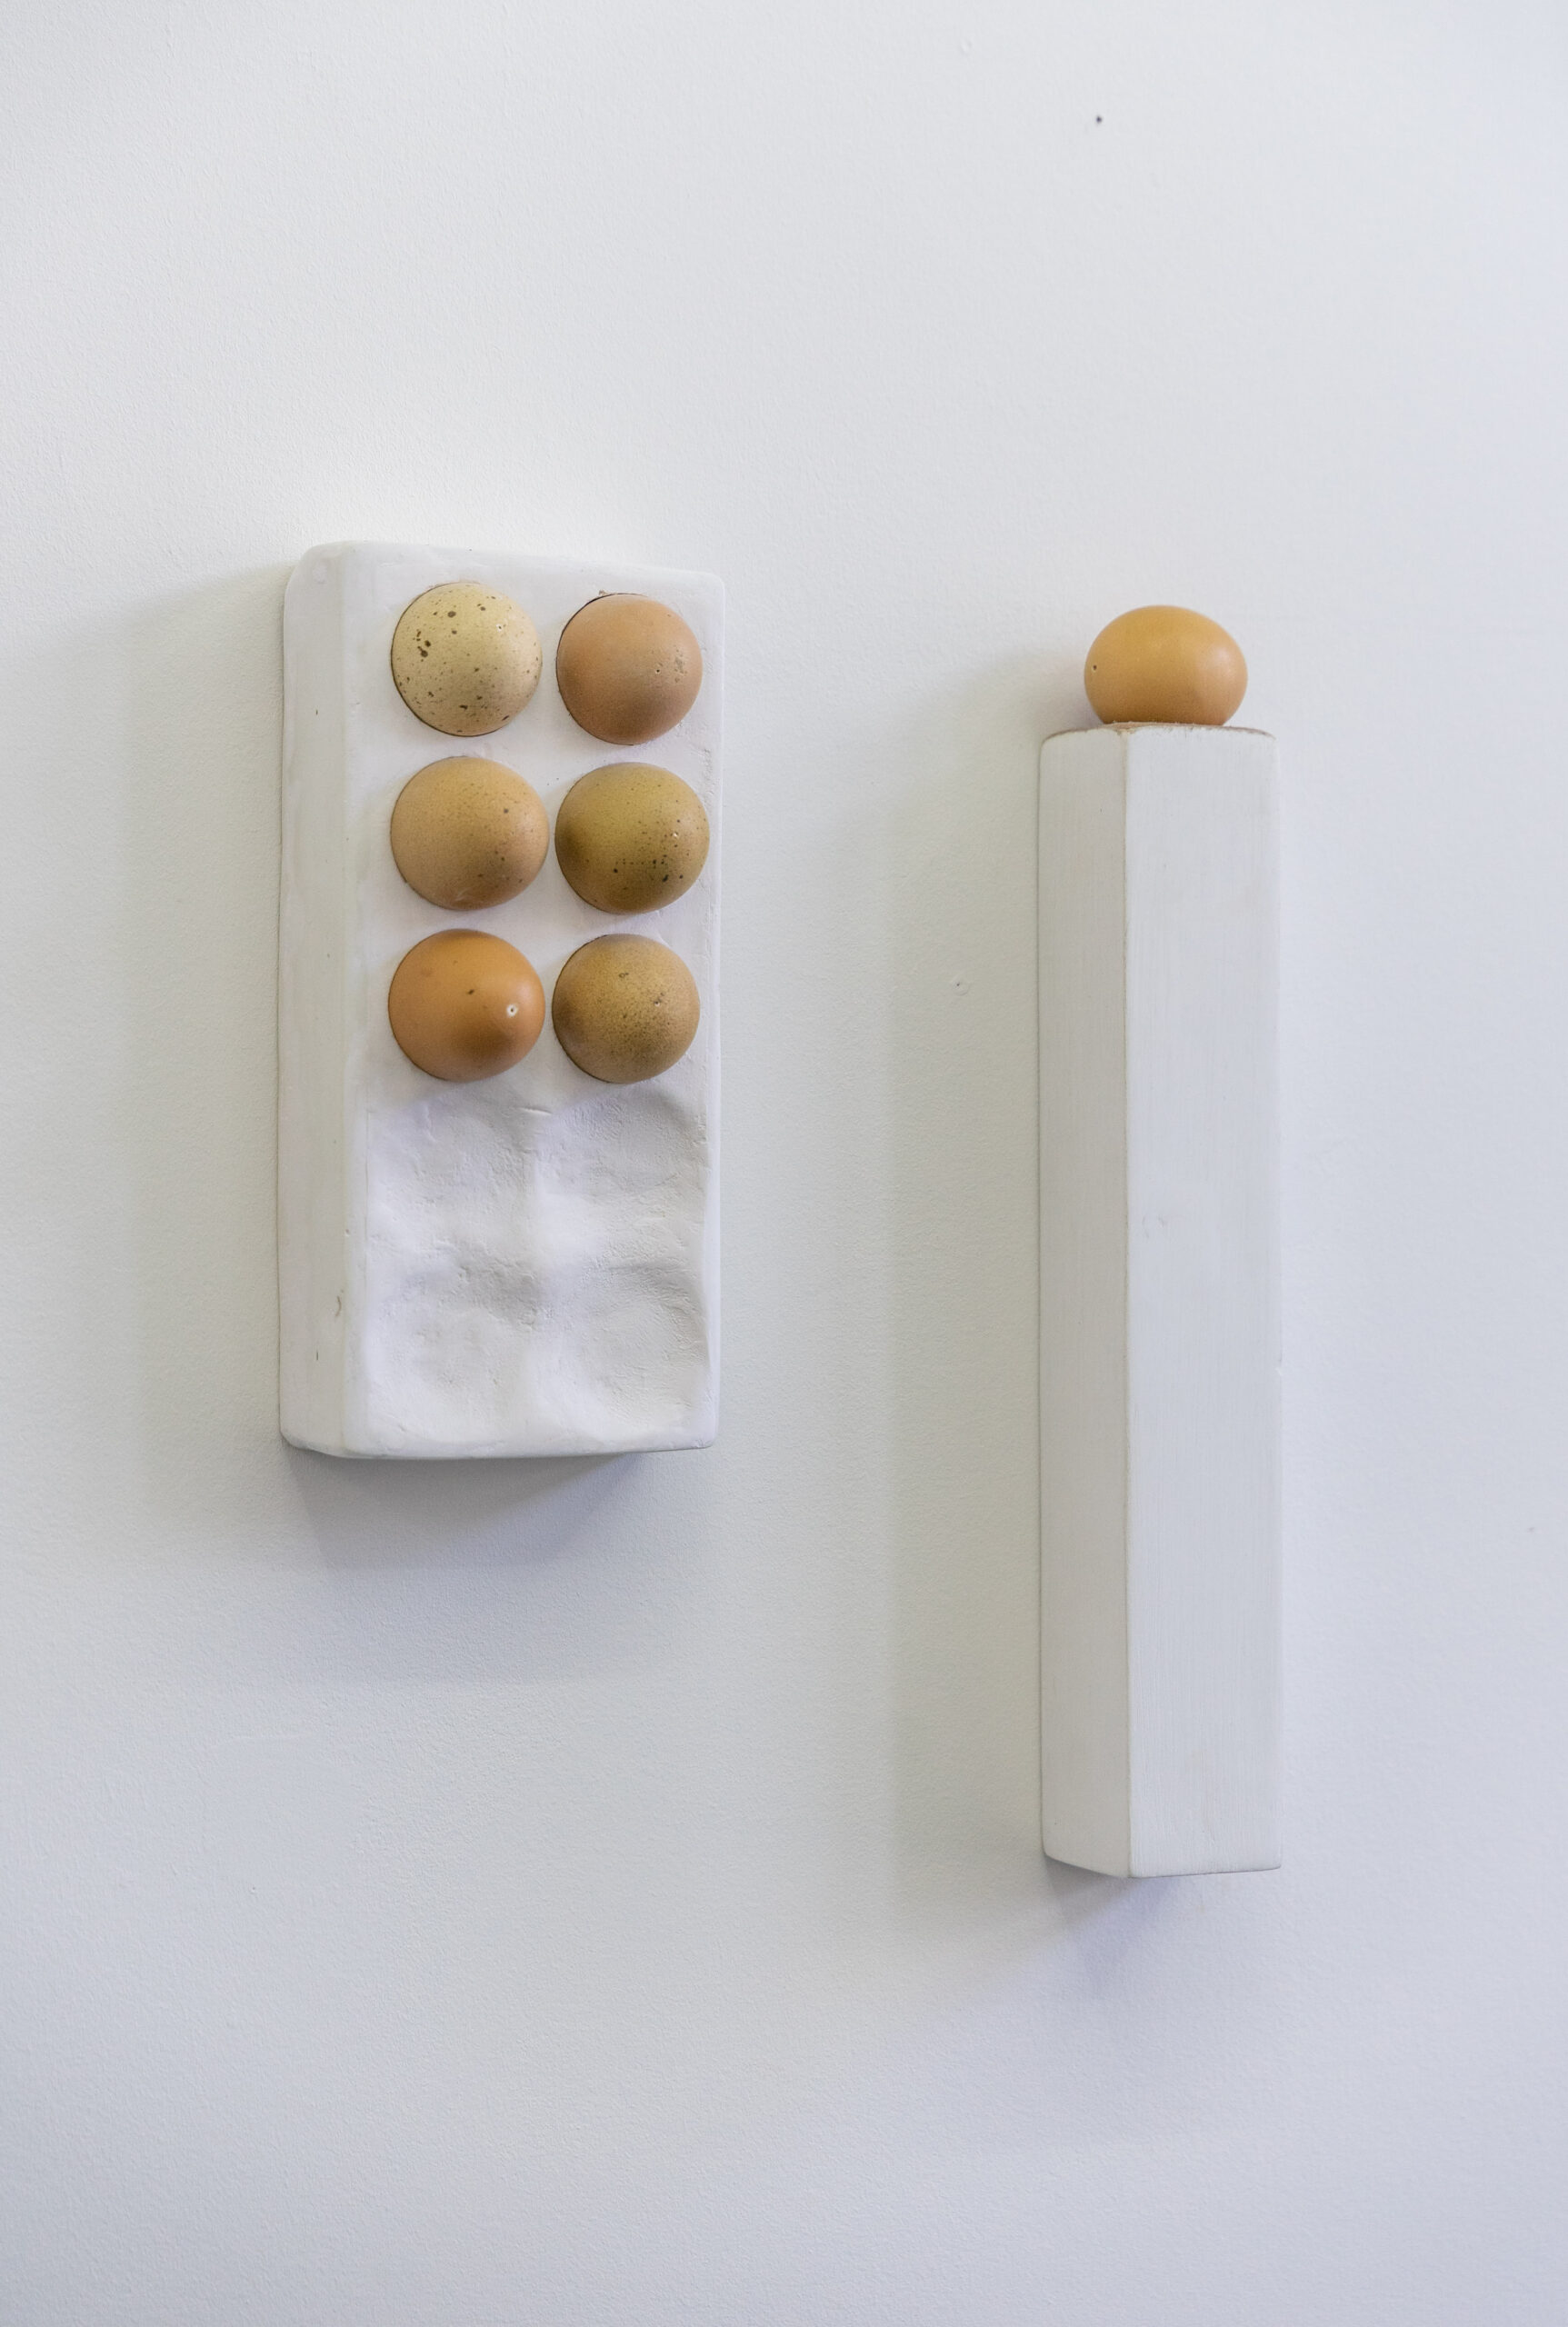 Alexandra Phillips, 2021 - brown egg blown out, wood, whitewash 